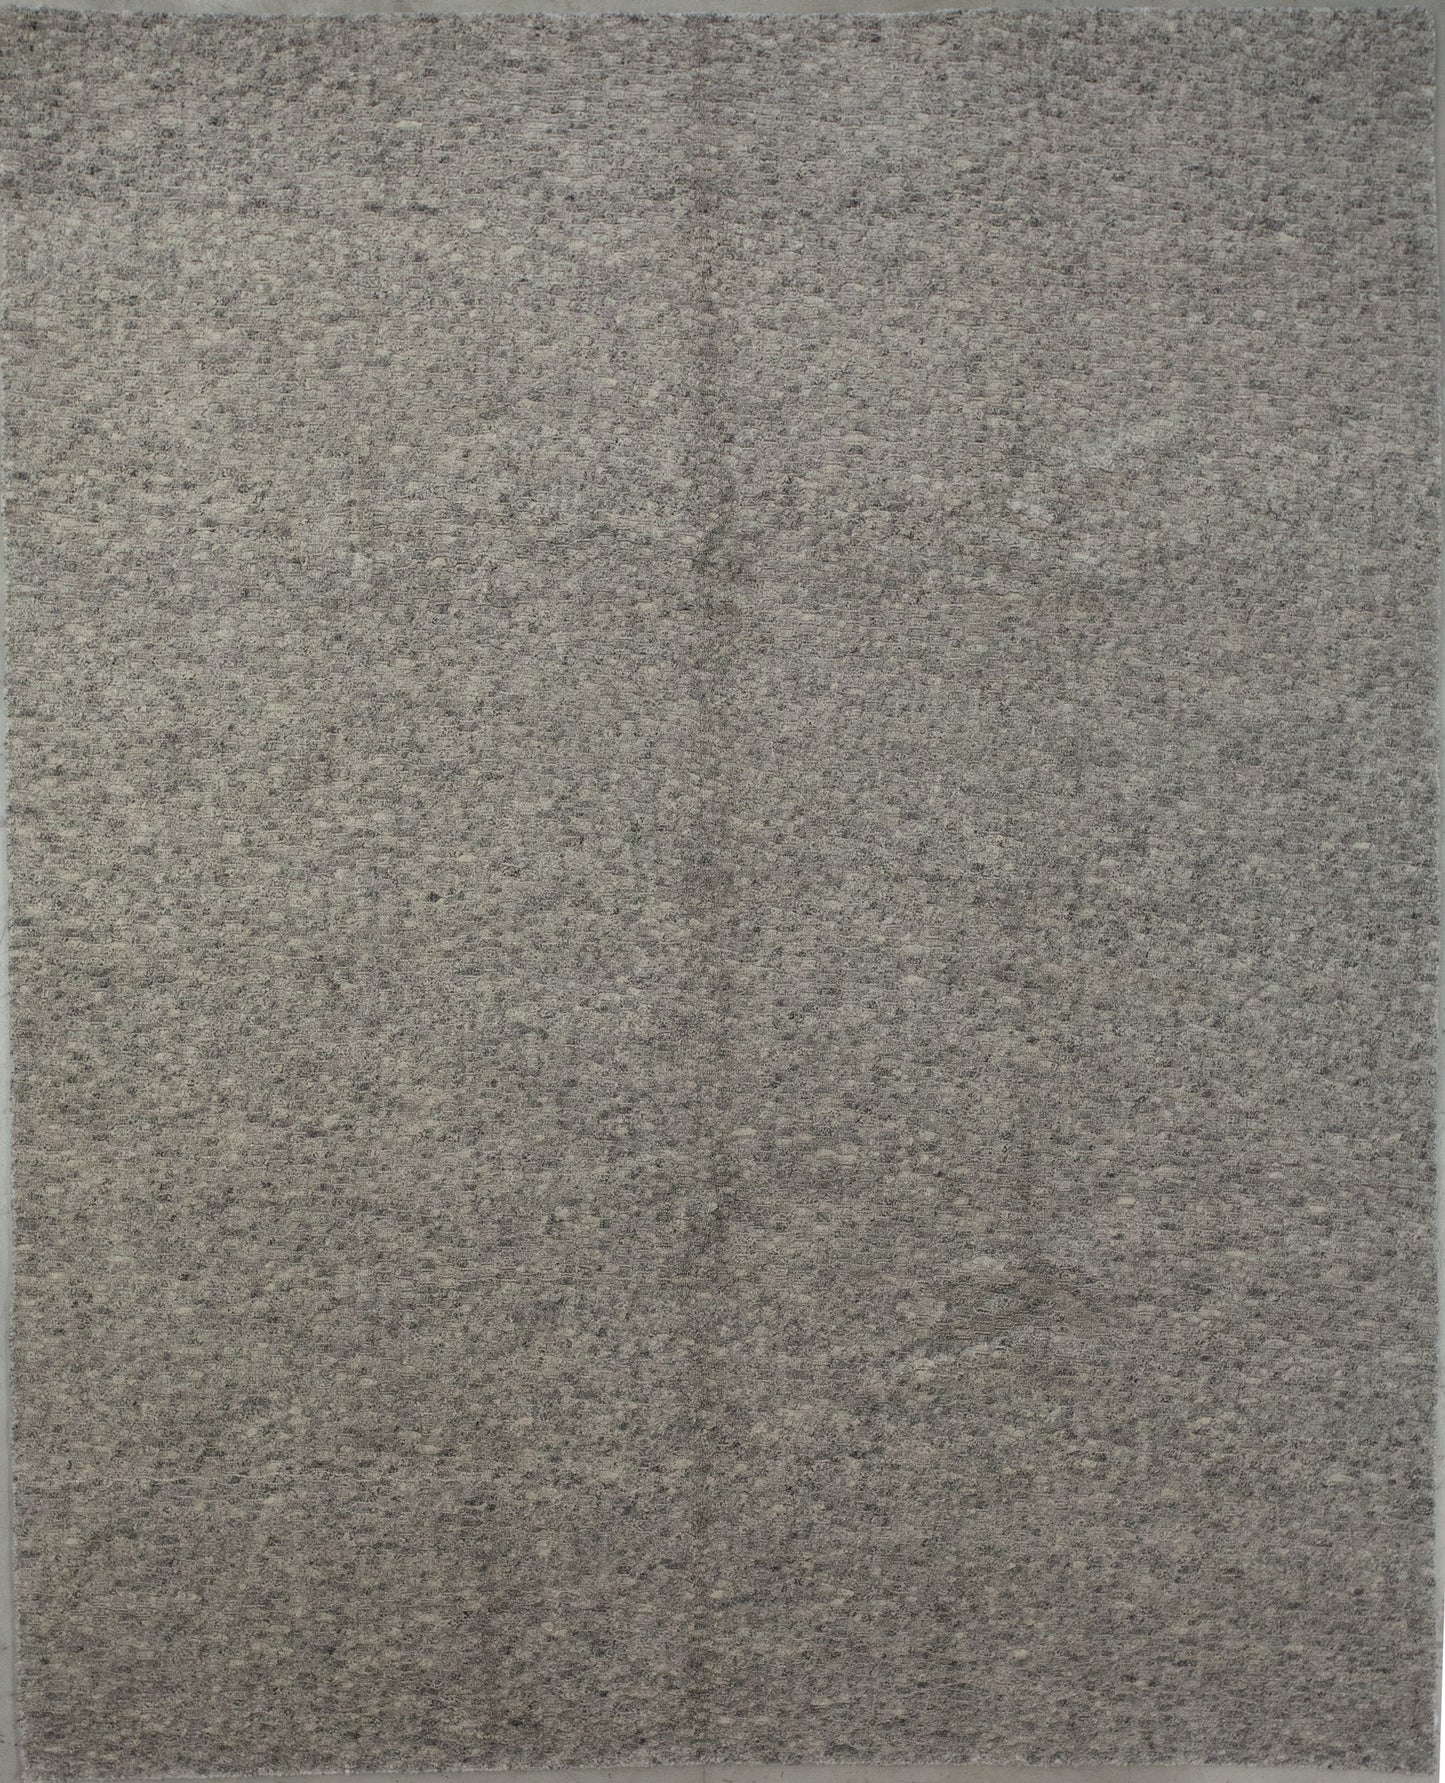 Modern carpet wove with gray and beige color scheme.